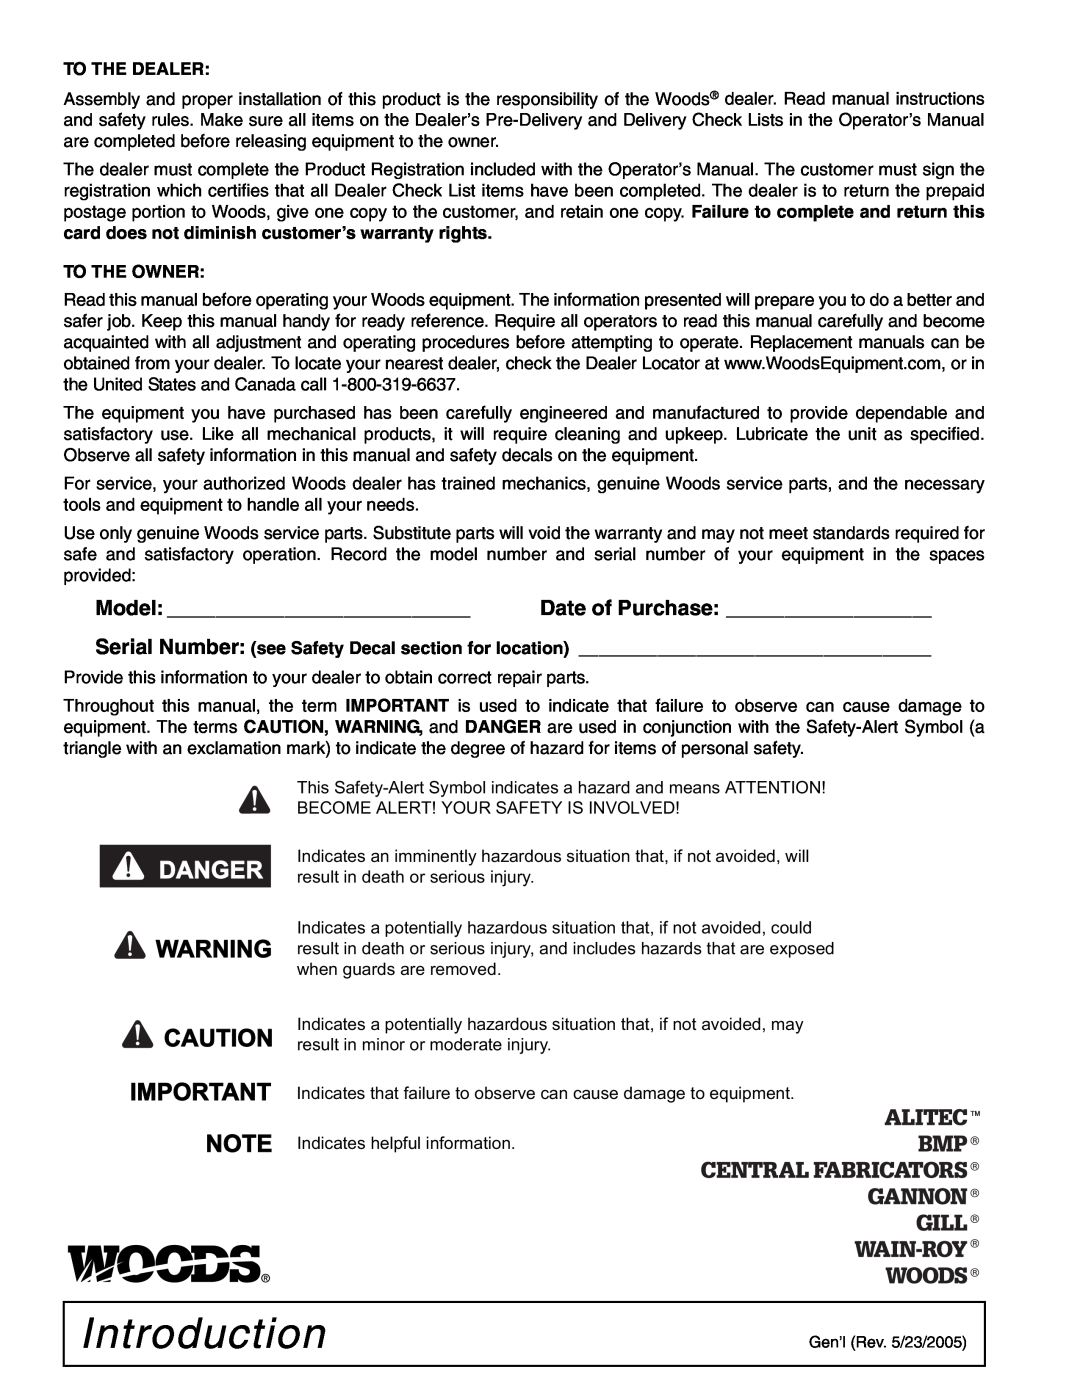 Woods Equipment RDC54, RD60, RD72 manual Introduction, Danger, Important Note 